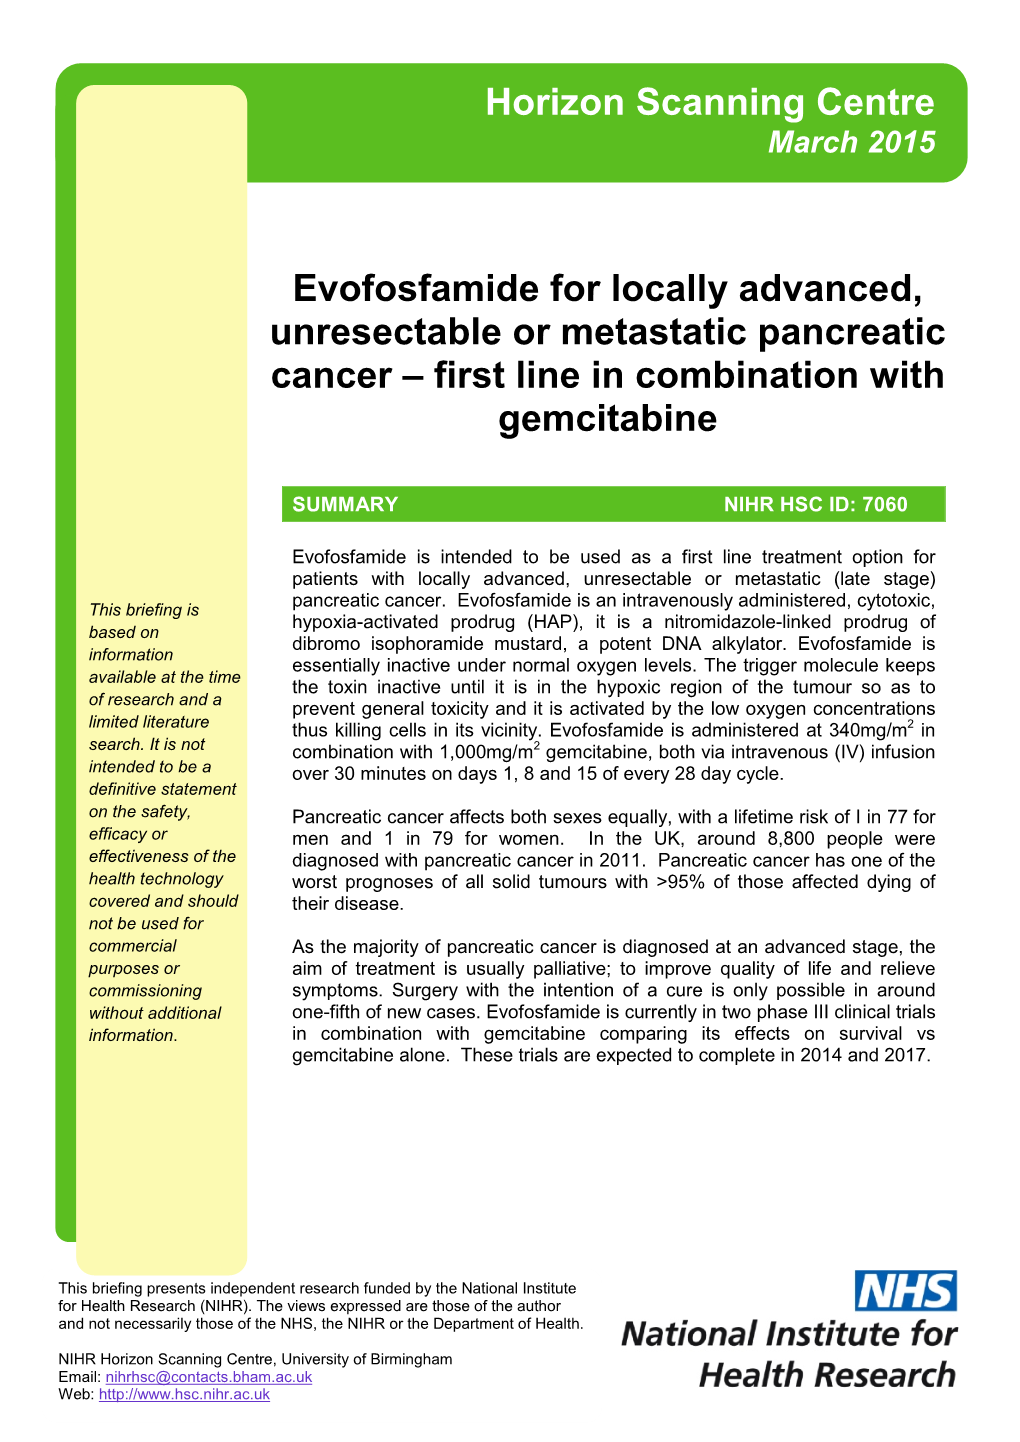 Evofosfamide for Locally Advanced, Unresectable Or Metastatic Pancreatic Cancer – First Line in Combination with Gemcitabine